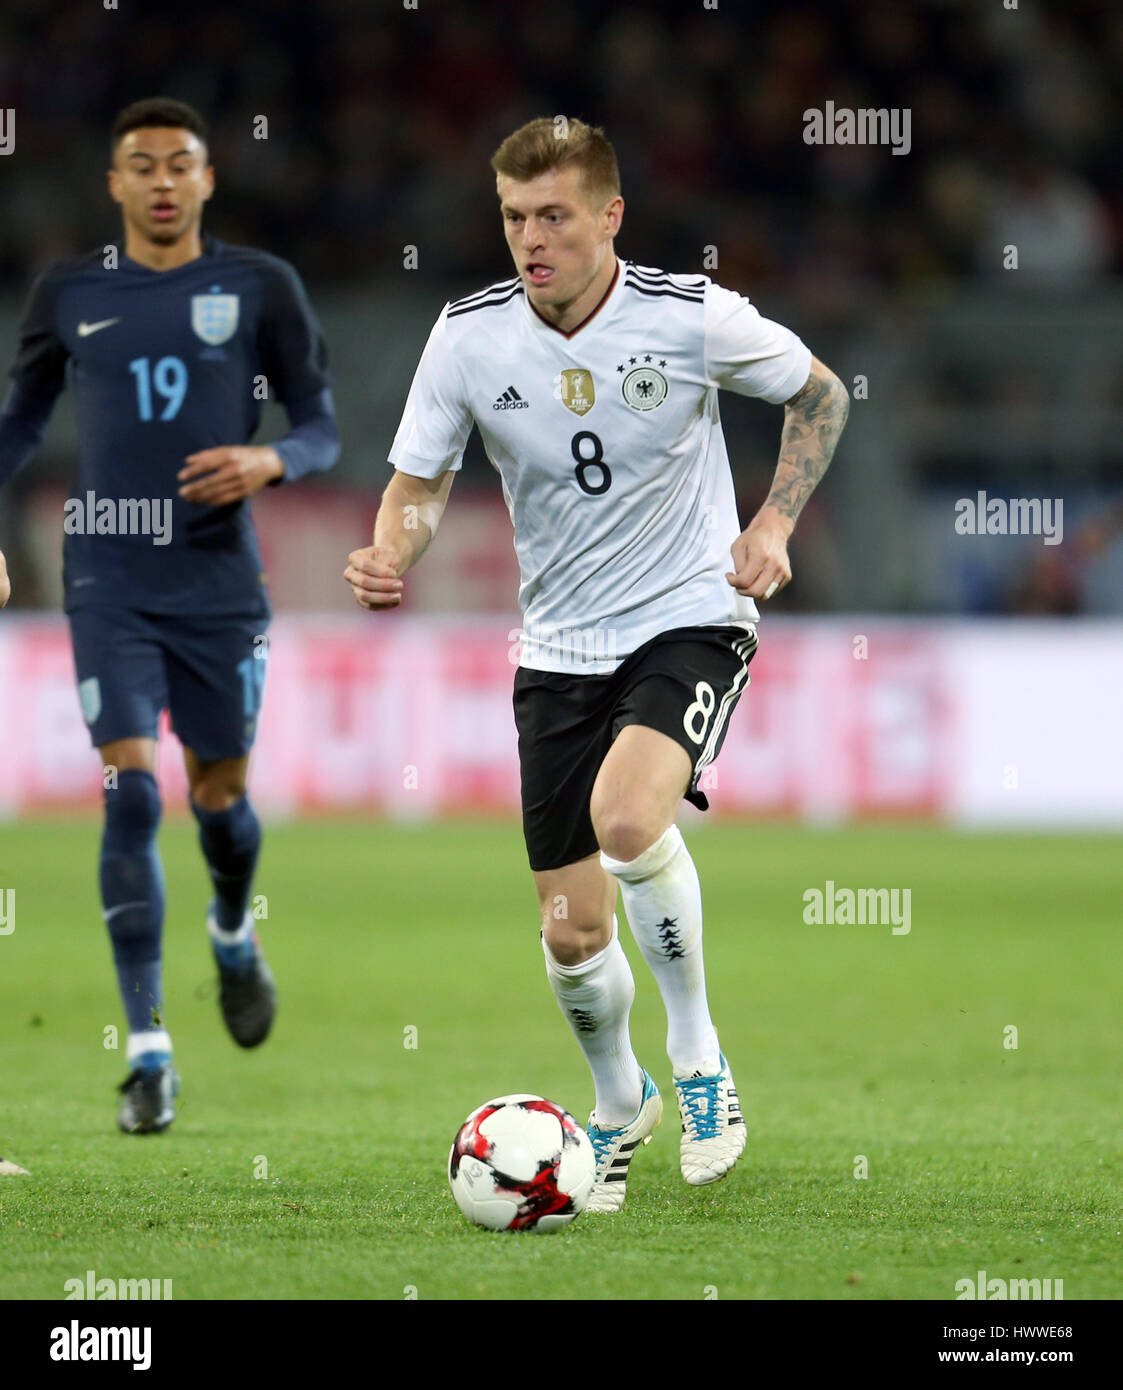 Germany's Toni Kroos in action during the international friendly soccer match between Germany and England at the Signal Iduna Park in Dortmund, Germany, 22 March 2017. Photo: Ina Fassbender/dpa Stock Photo